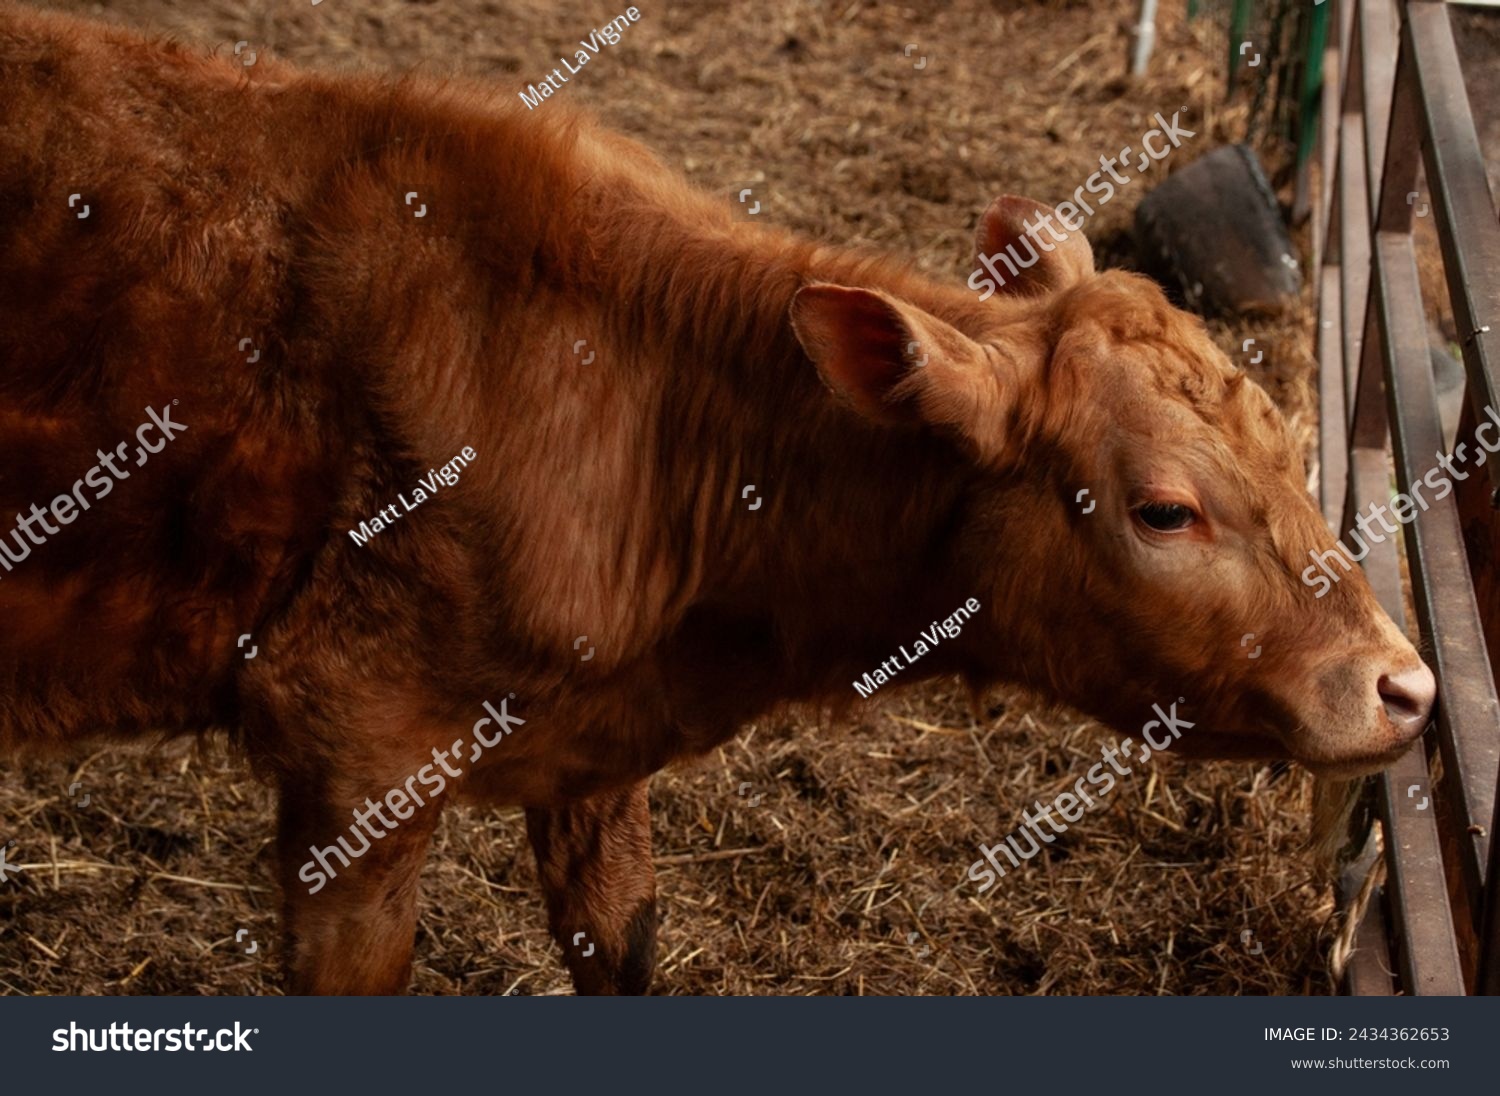 A Red Calf in a barn on a farm during the summer. #2434362653